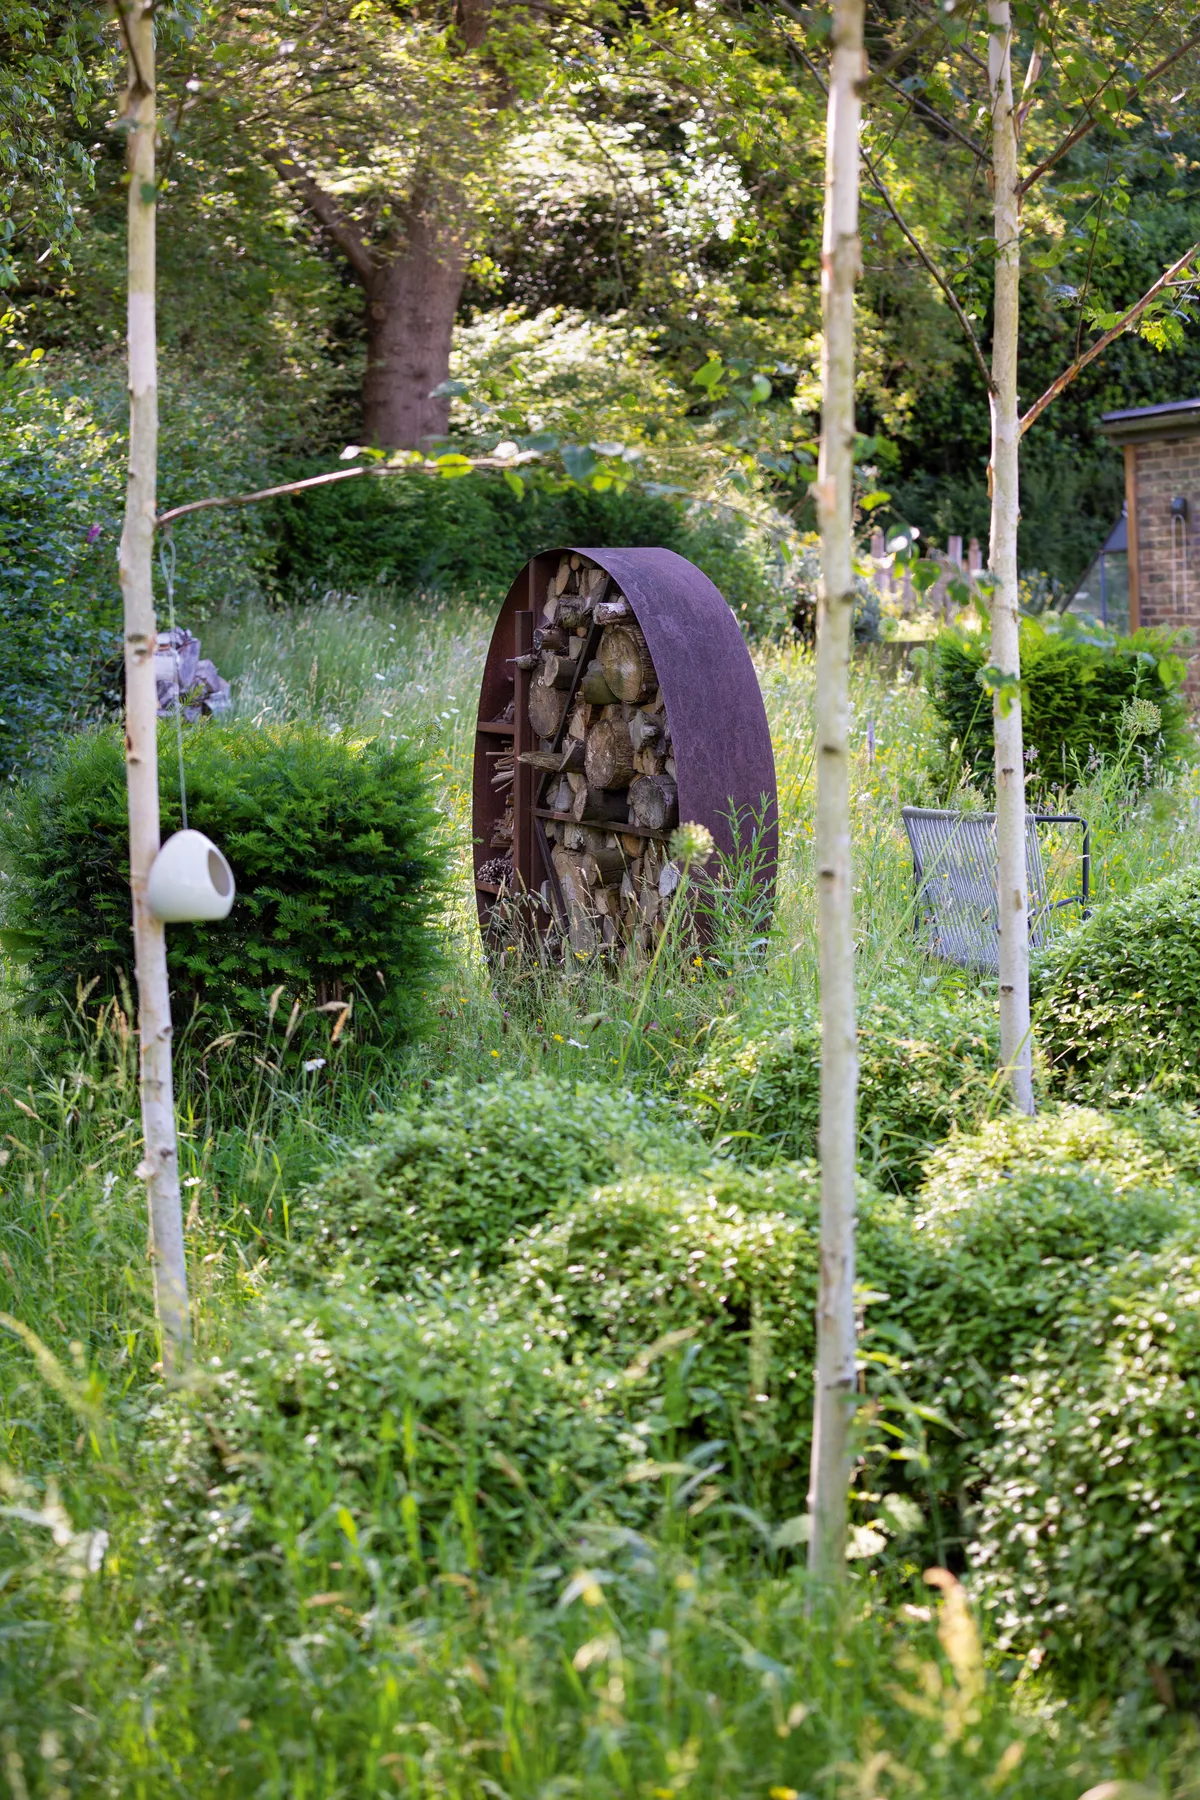 A focal point for the garden is the bespoke Corten steel log-store. “We’ve worked with a wonderful steel fabricator for the past 12 years,” says Amanda. Designed as a bug hotel, the logs remain in situ. “We’ve found leaf-cutter bees laying eggs in the bamboo canes, which is lovely.”